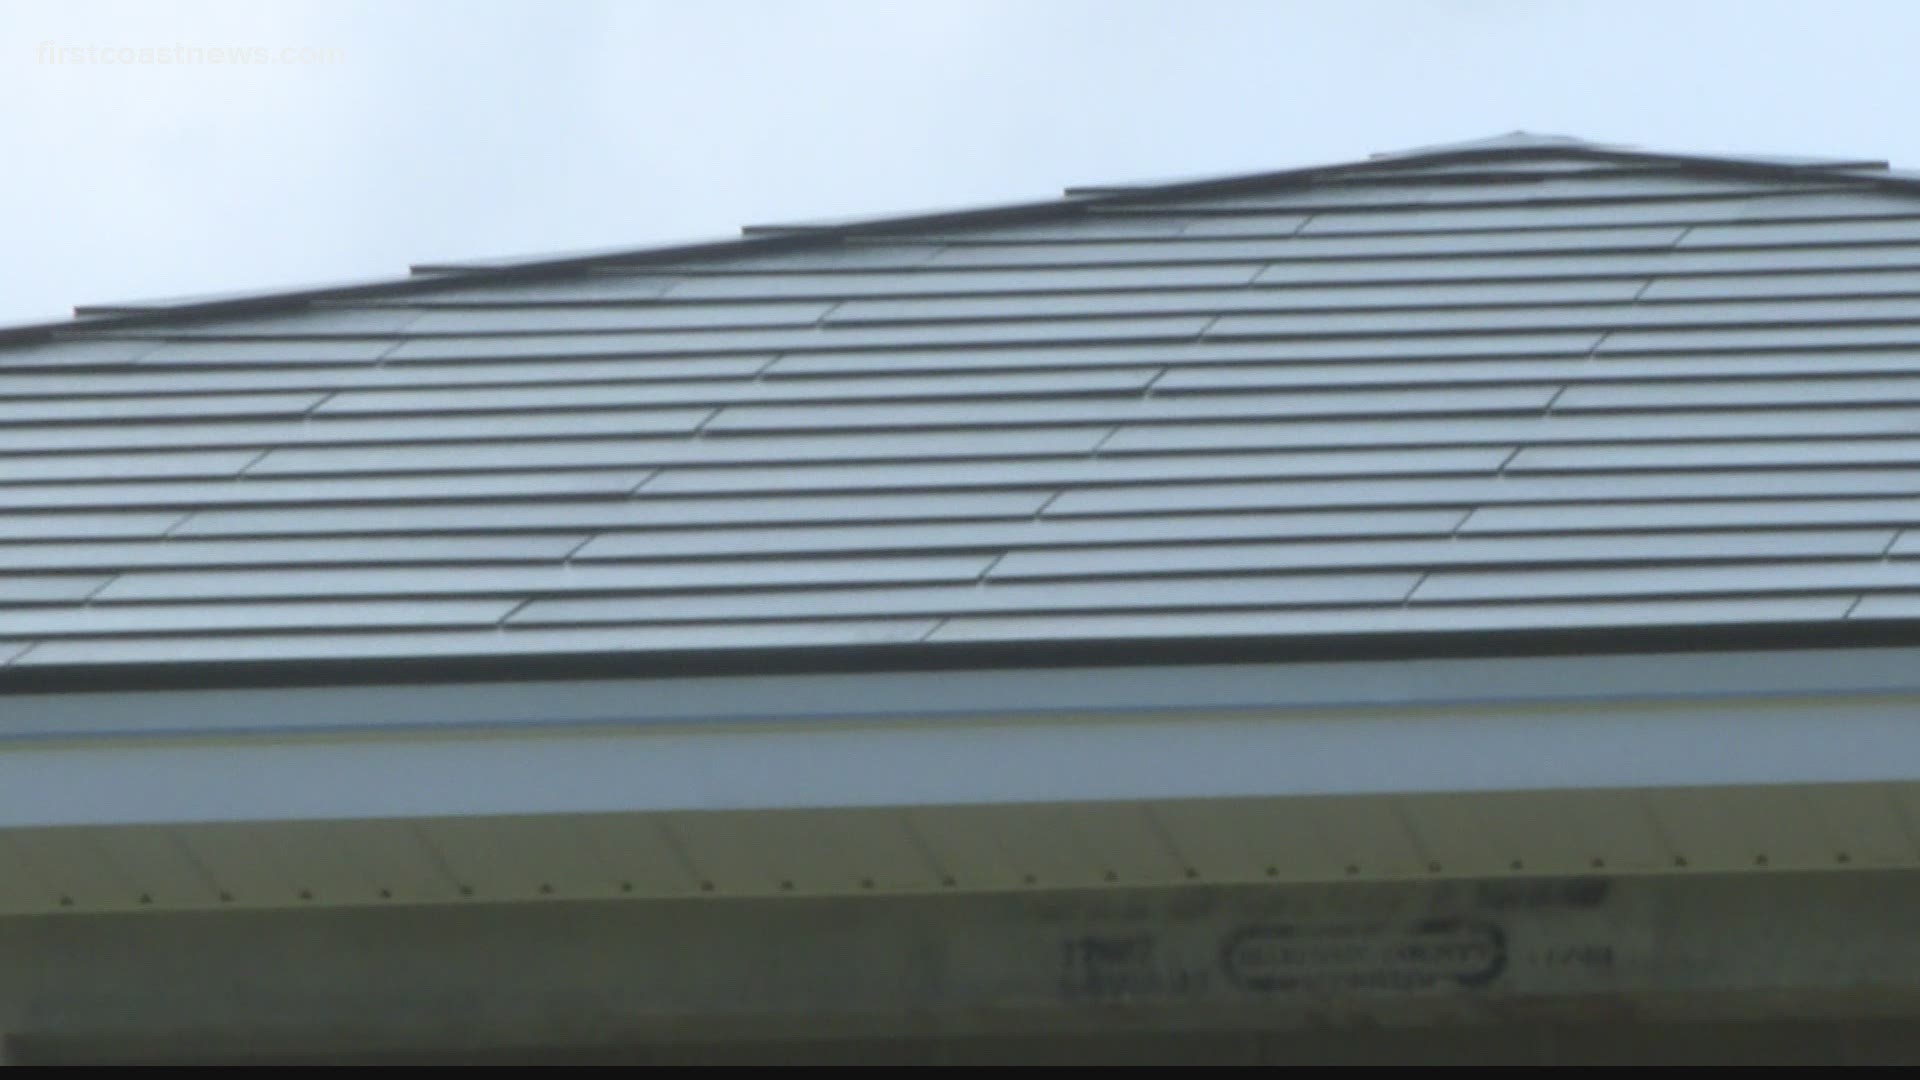 The shingles will help to power the home and the couple's car. The solar roof cost as much as a brand new regular roof.